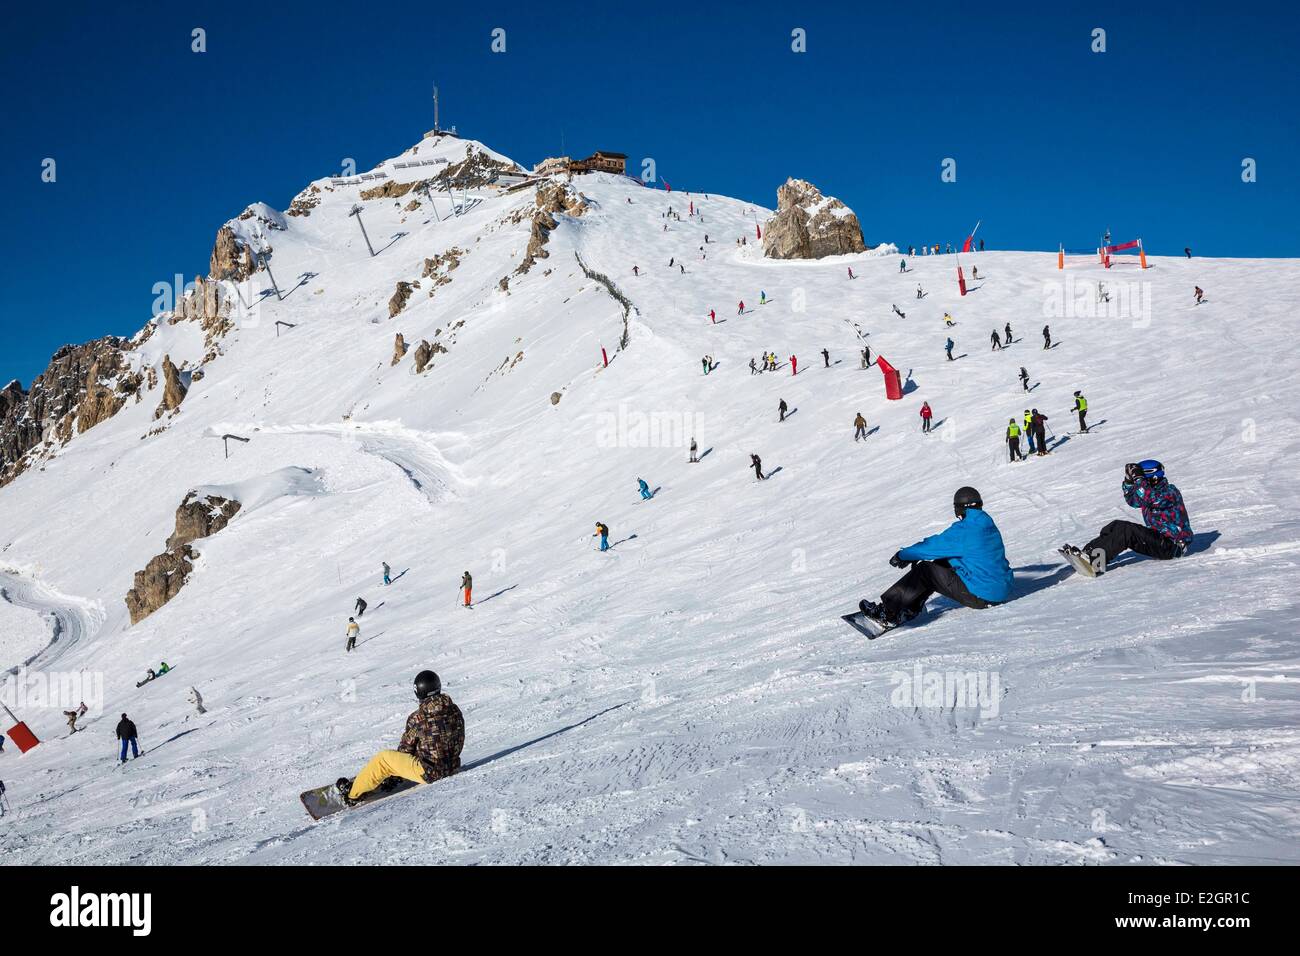 France Savoie Tarentaise valley Meribel Courchevel Les Trois Vallees (The Three Valleys) one of biggest ski areas in world with 600km of marked trails Vanoise Massif view of Sommet de La Saulire (2738m) Stock Photo